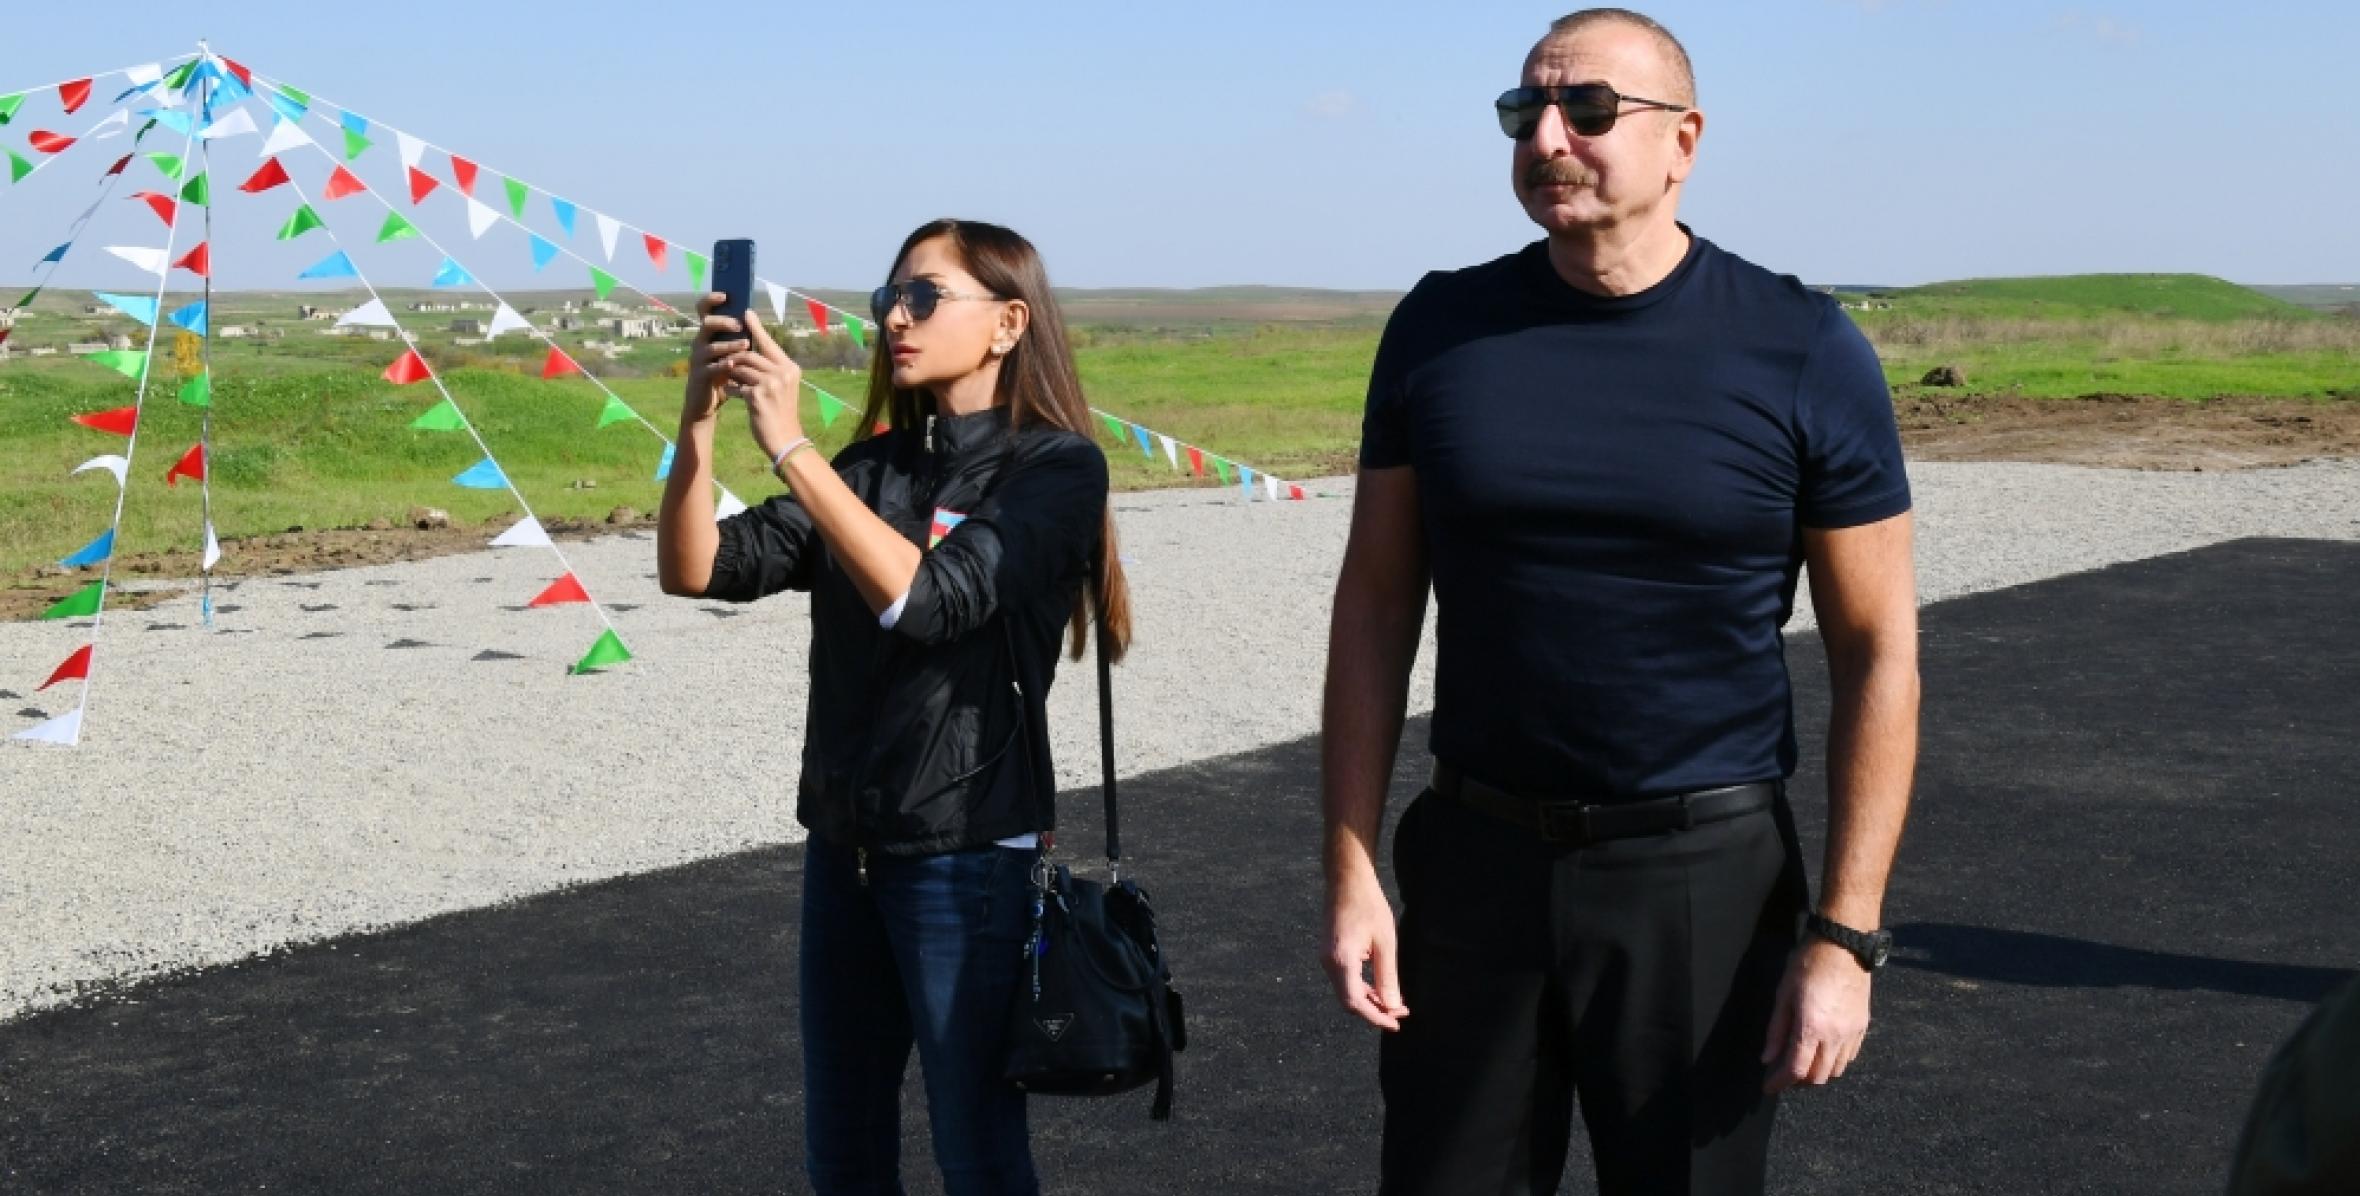 Ilham Aliyev and First Lady Mehriban Aliyeva arrived in Shusha city for visit